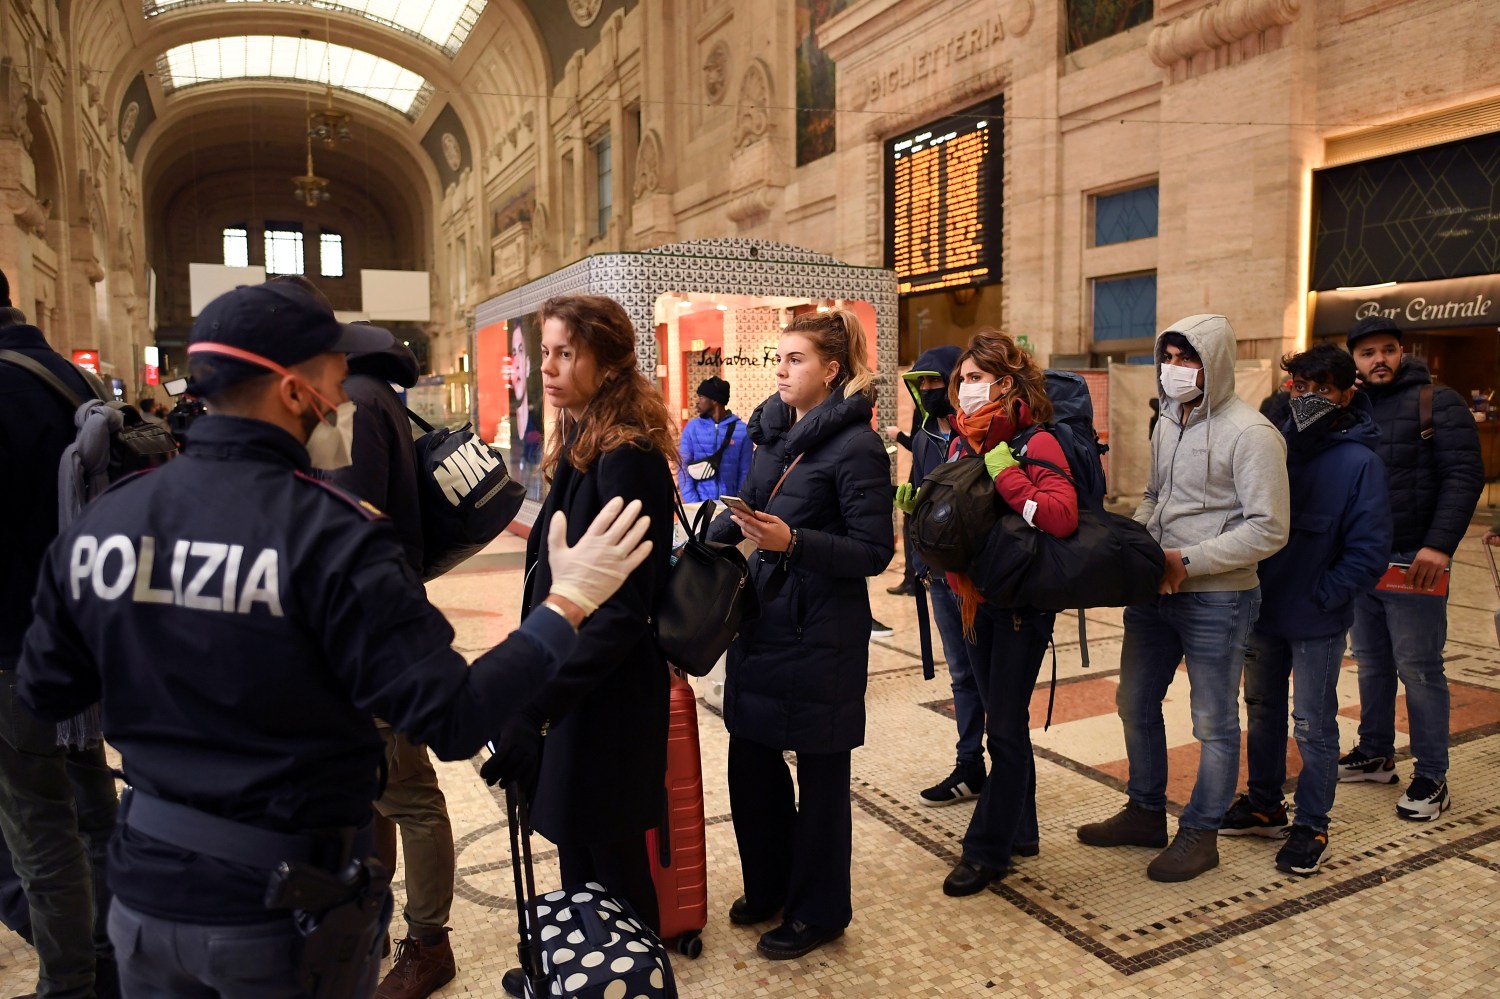 A police officer talks to people at Milan's main train station, following a government decree that has shut down large areas in the north of the country, to stem coronavirus contagion, Milan, Italy March 9, 2020. REUTERS/Daniele Mascolo